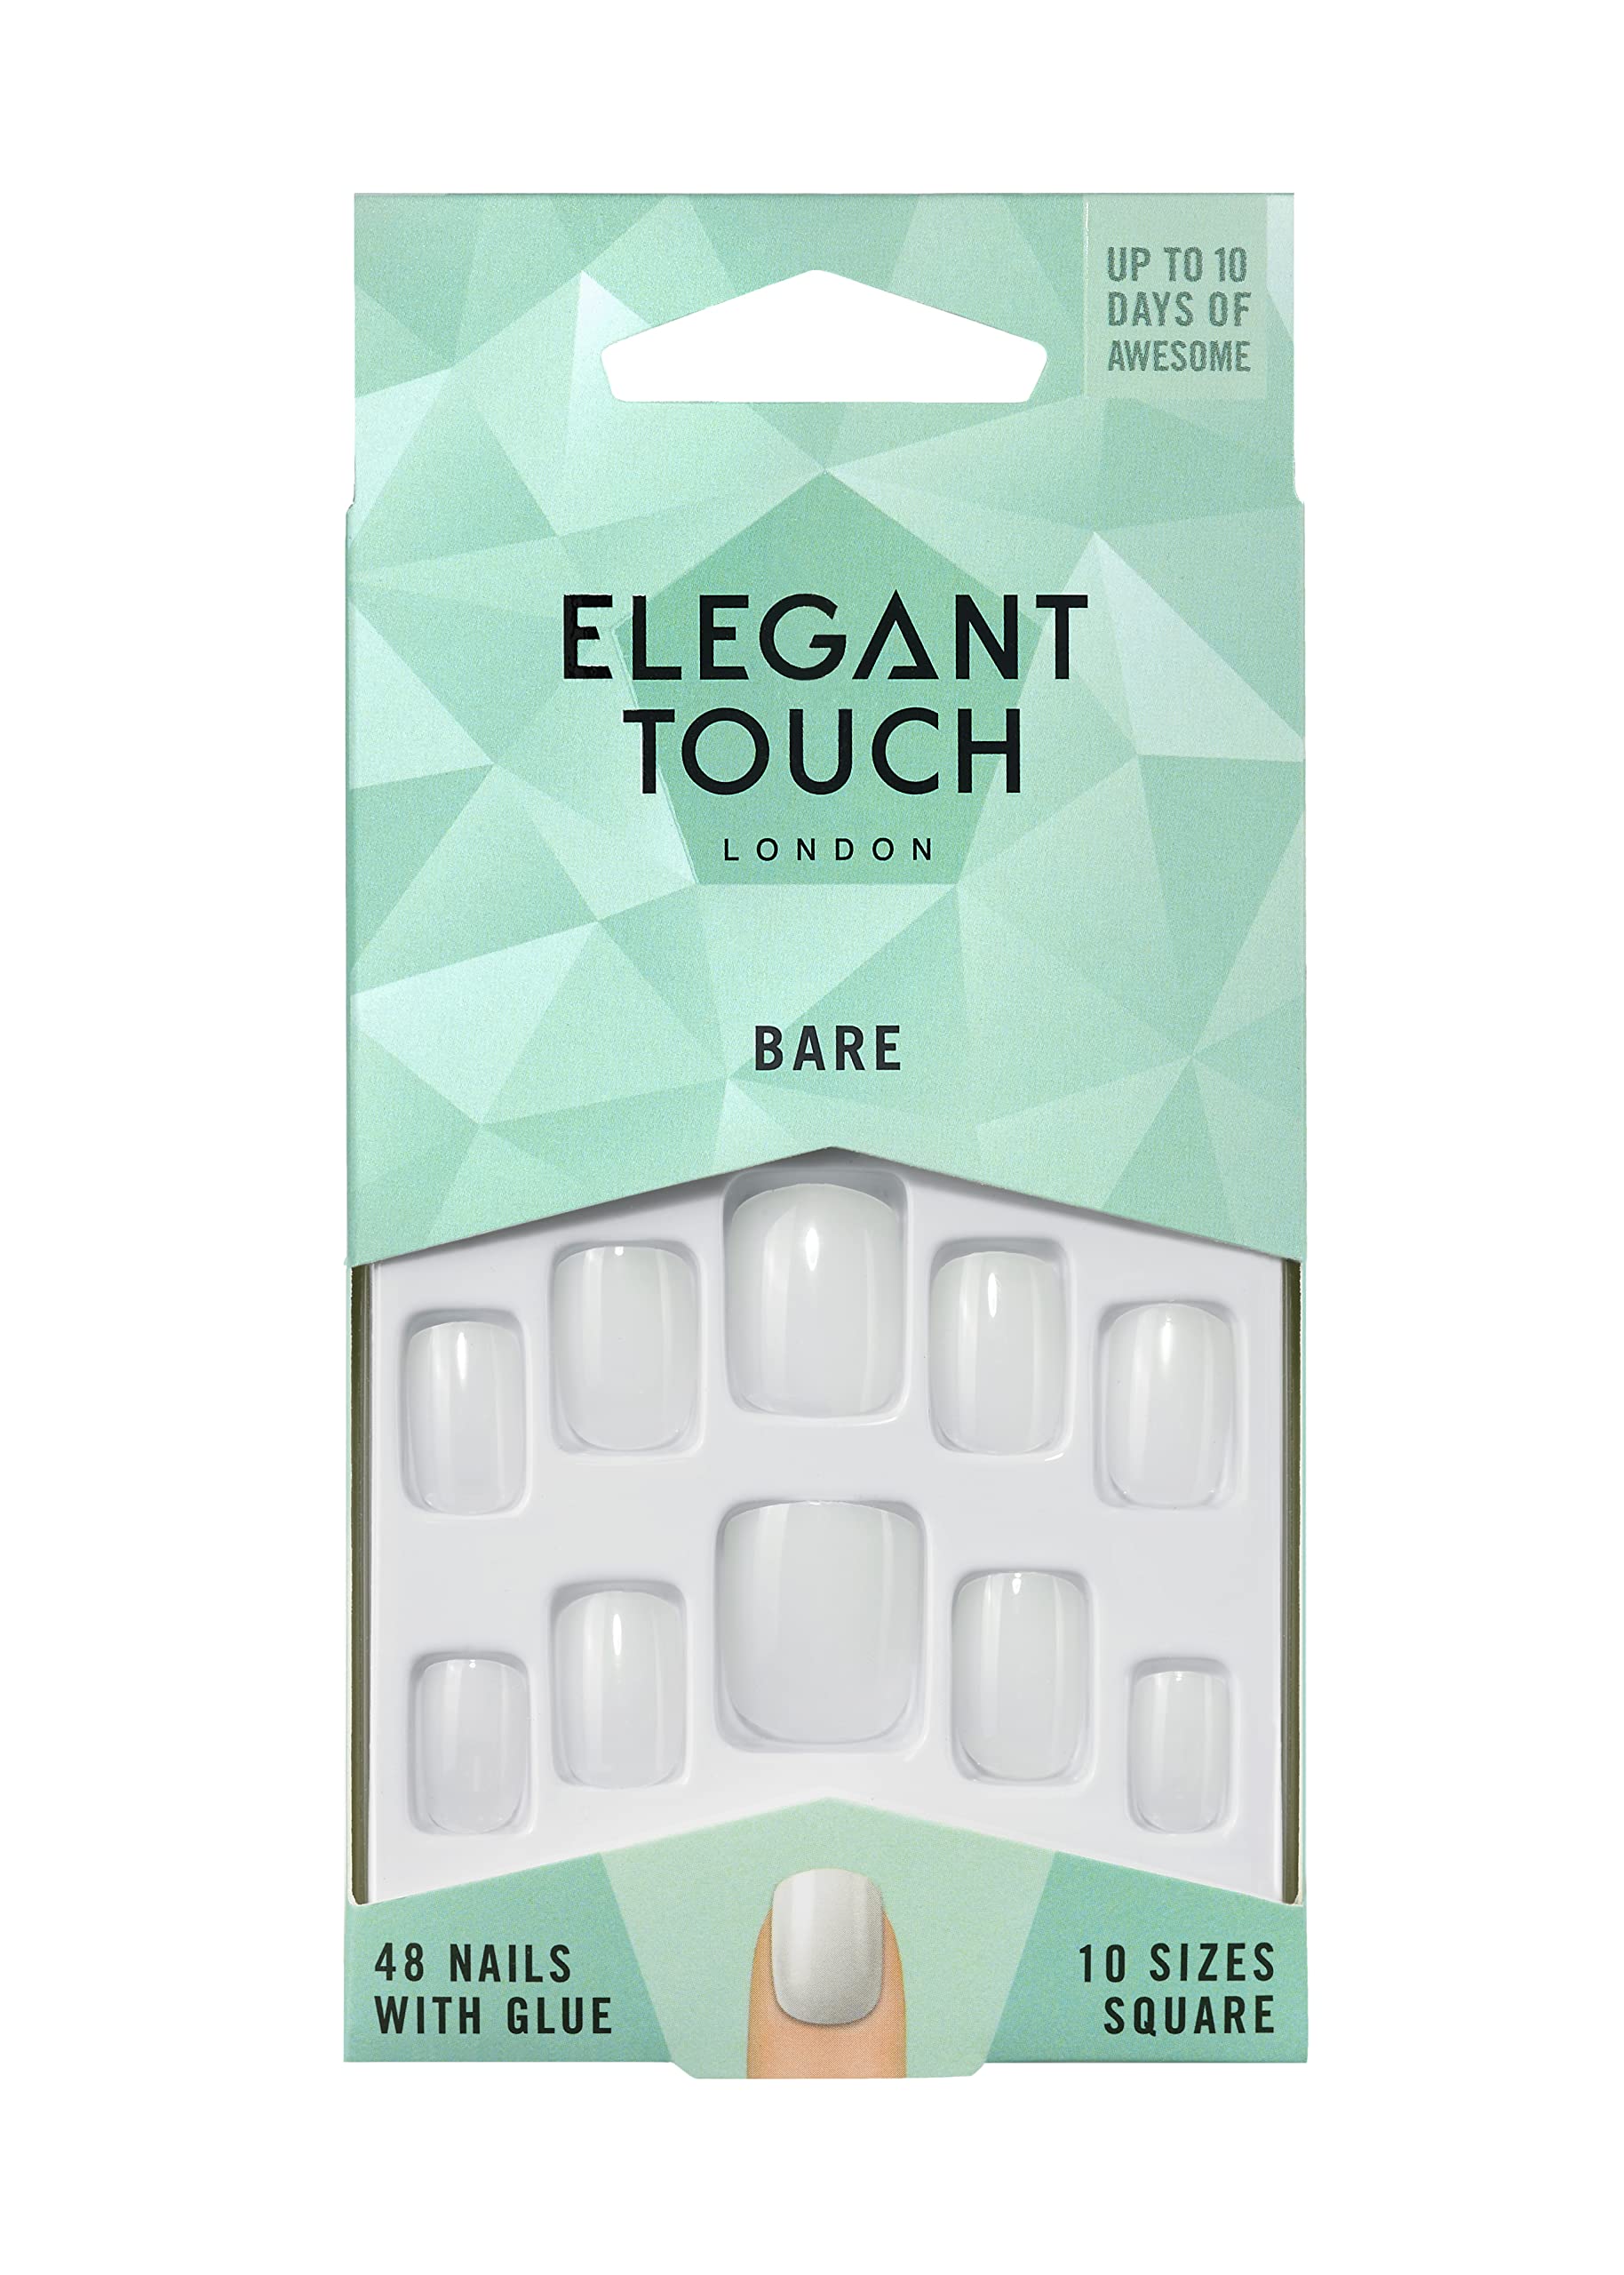 Elegant Touch - Bare Nails (was totally bare) - Square Shape